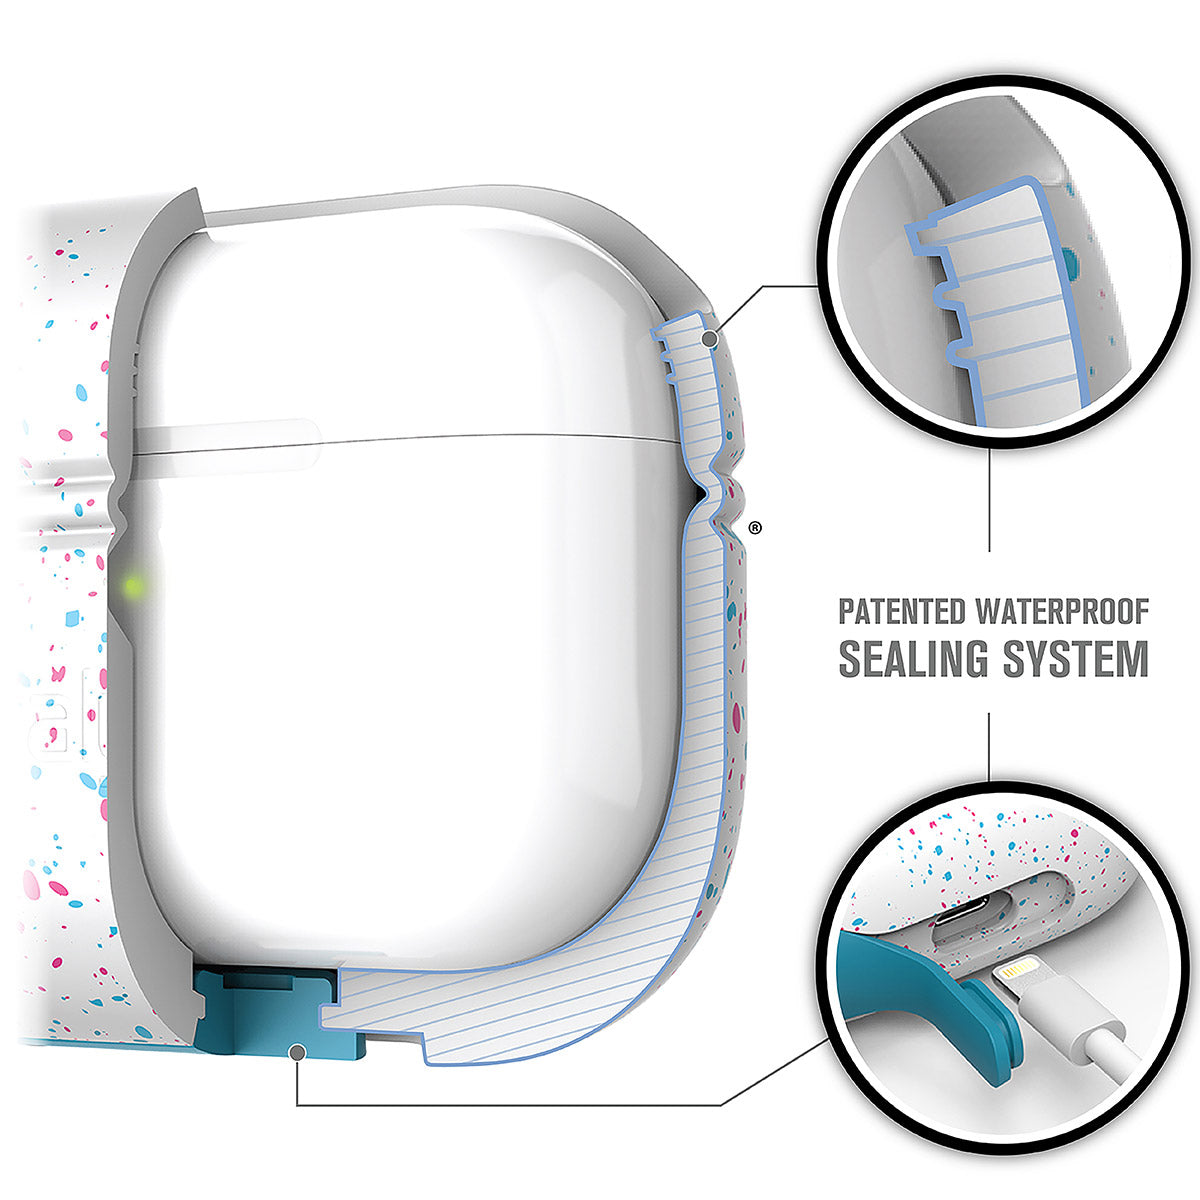 CATAPLAPDPROFUN | catalyst airpods pro gen 2 1 waterproof case carabiner special edition funfetti showing the patented waterproof sealing system texts reads patented waterproof sealing system